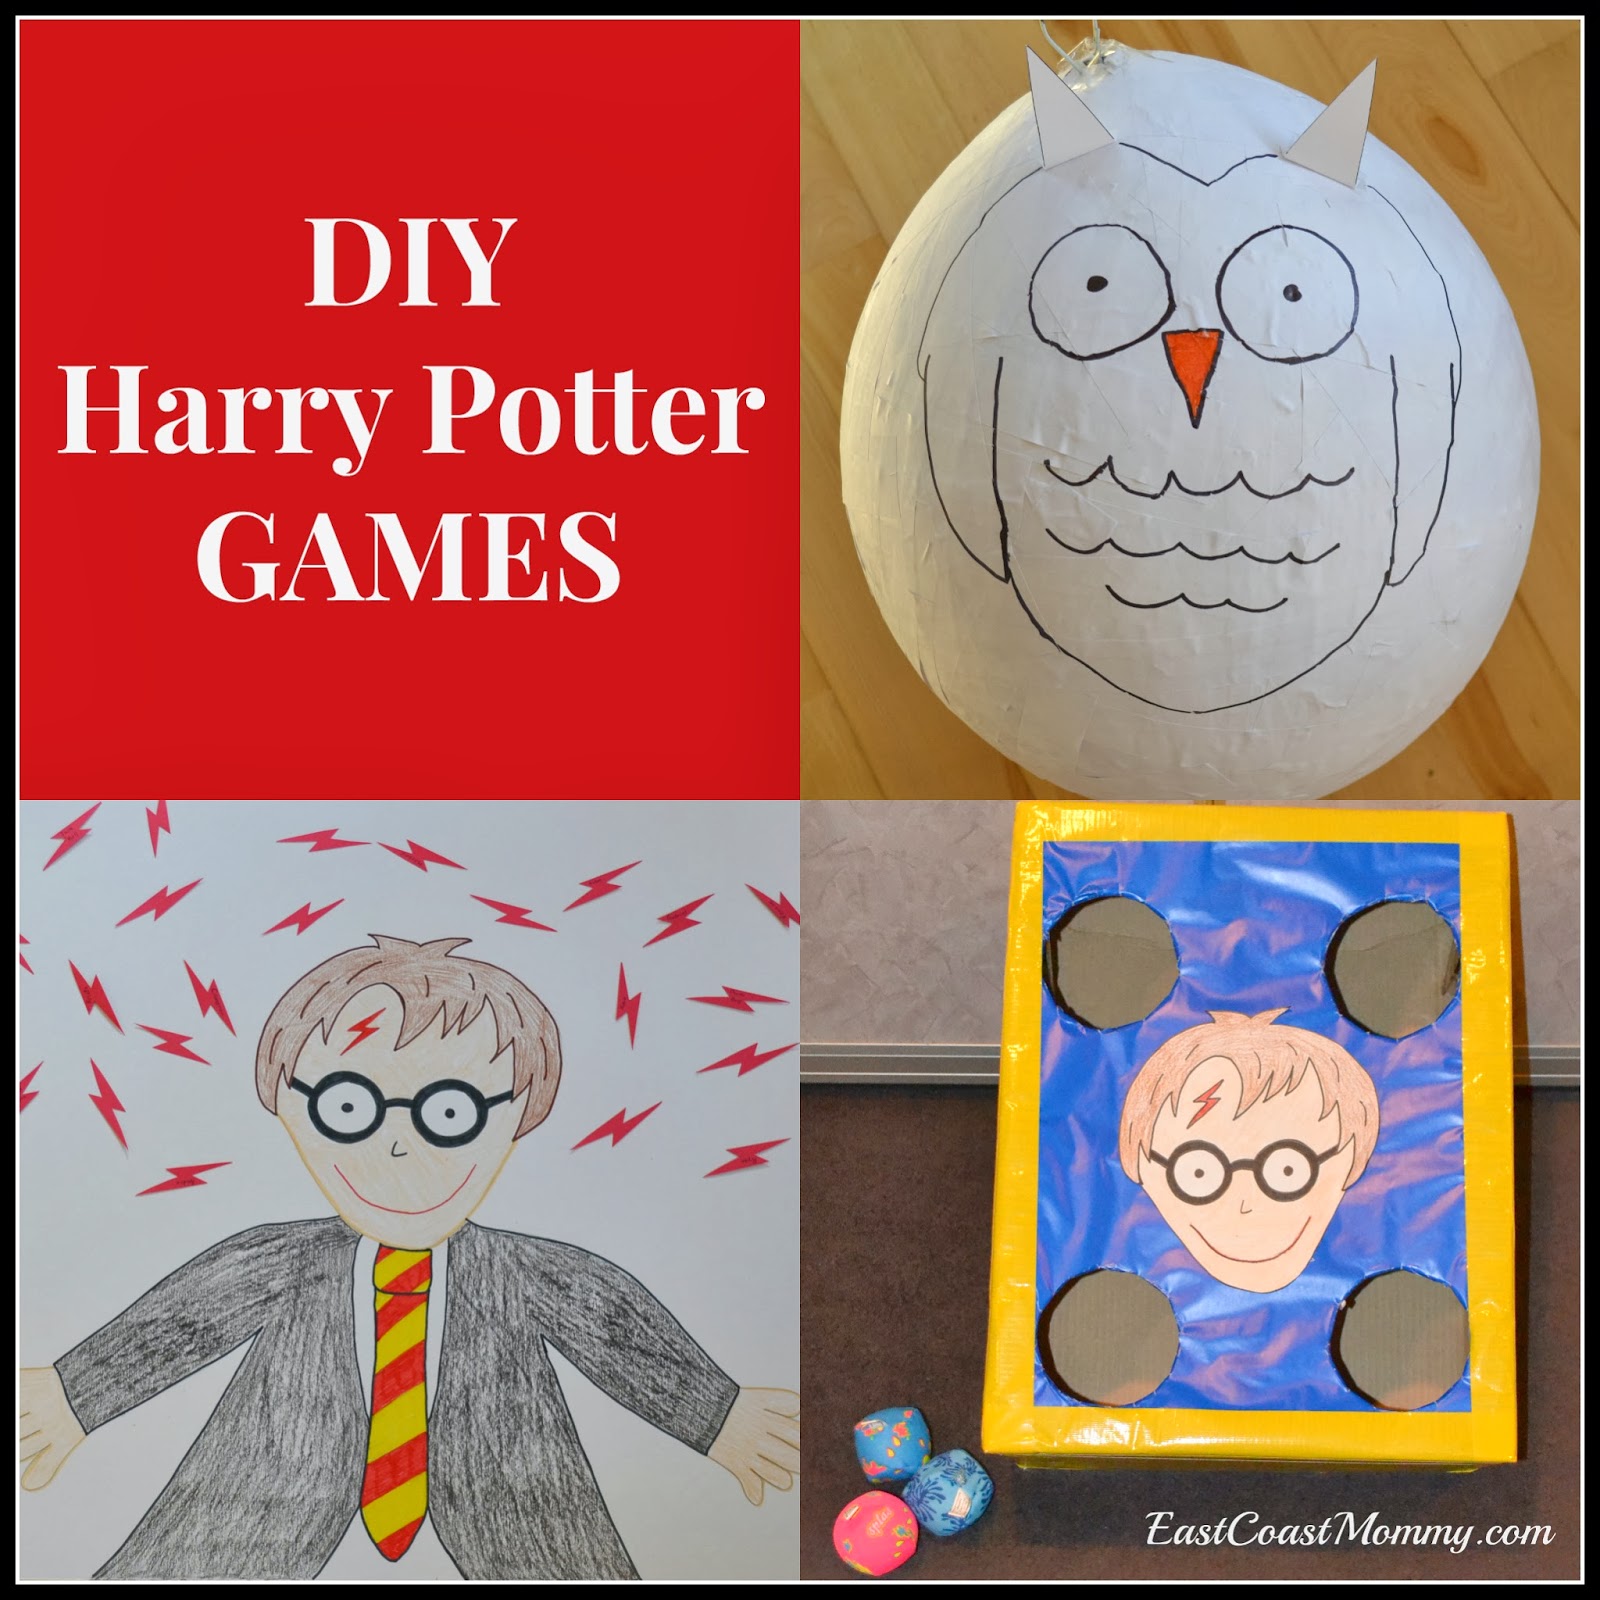 East Coast Mommy: Harry Potter Party Games